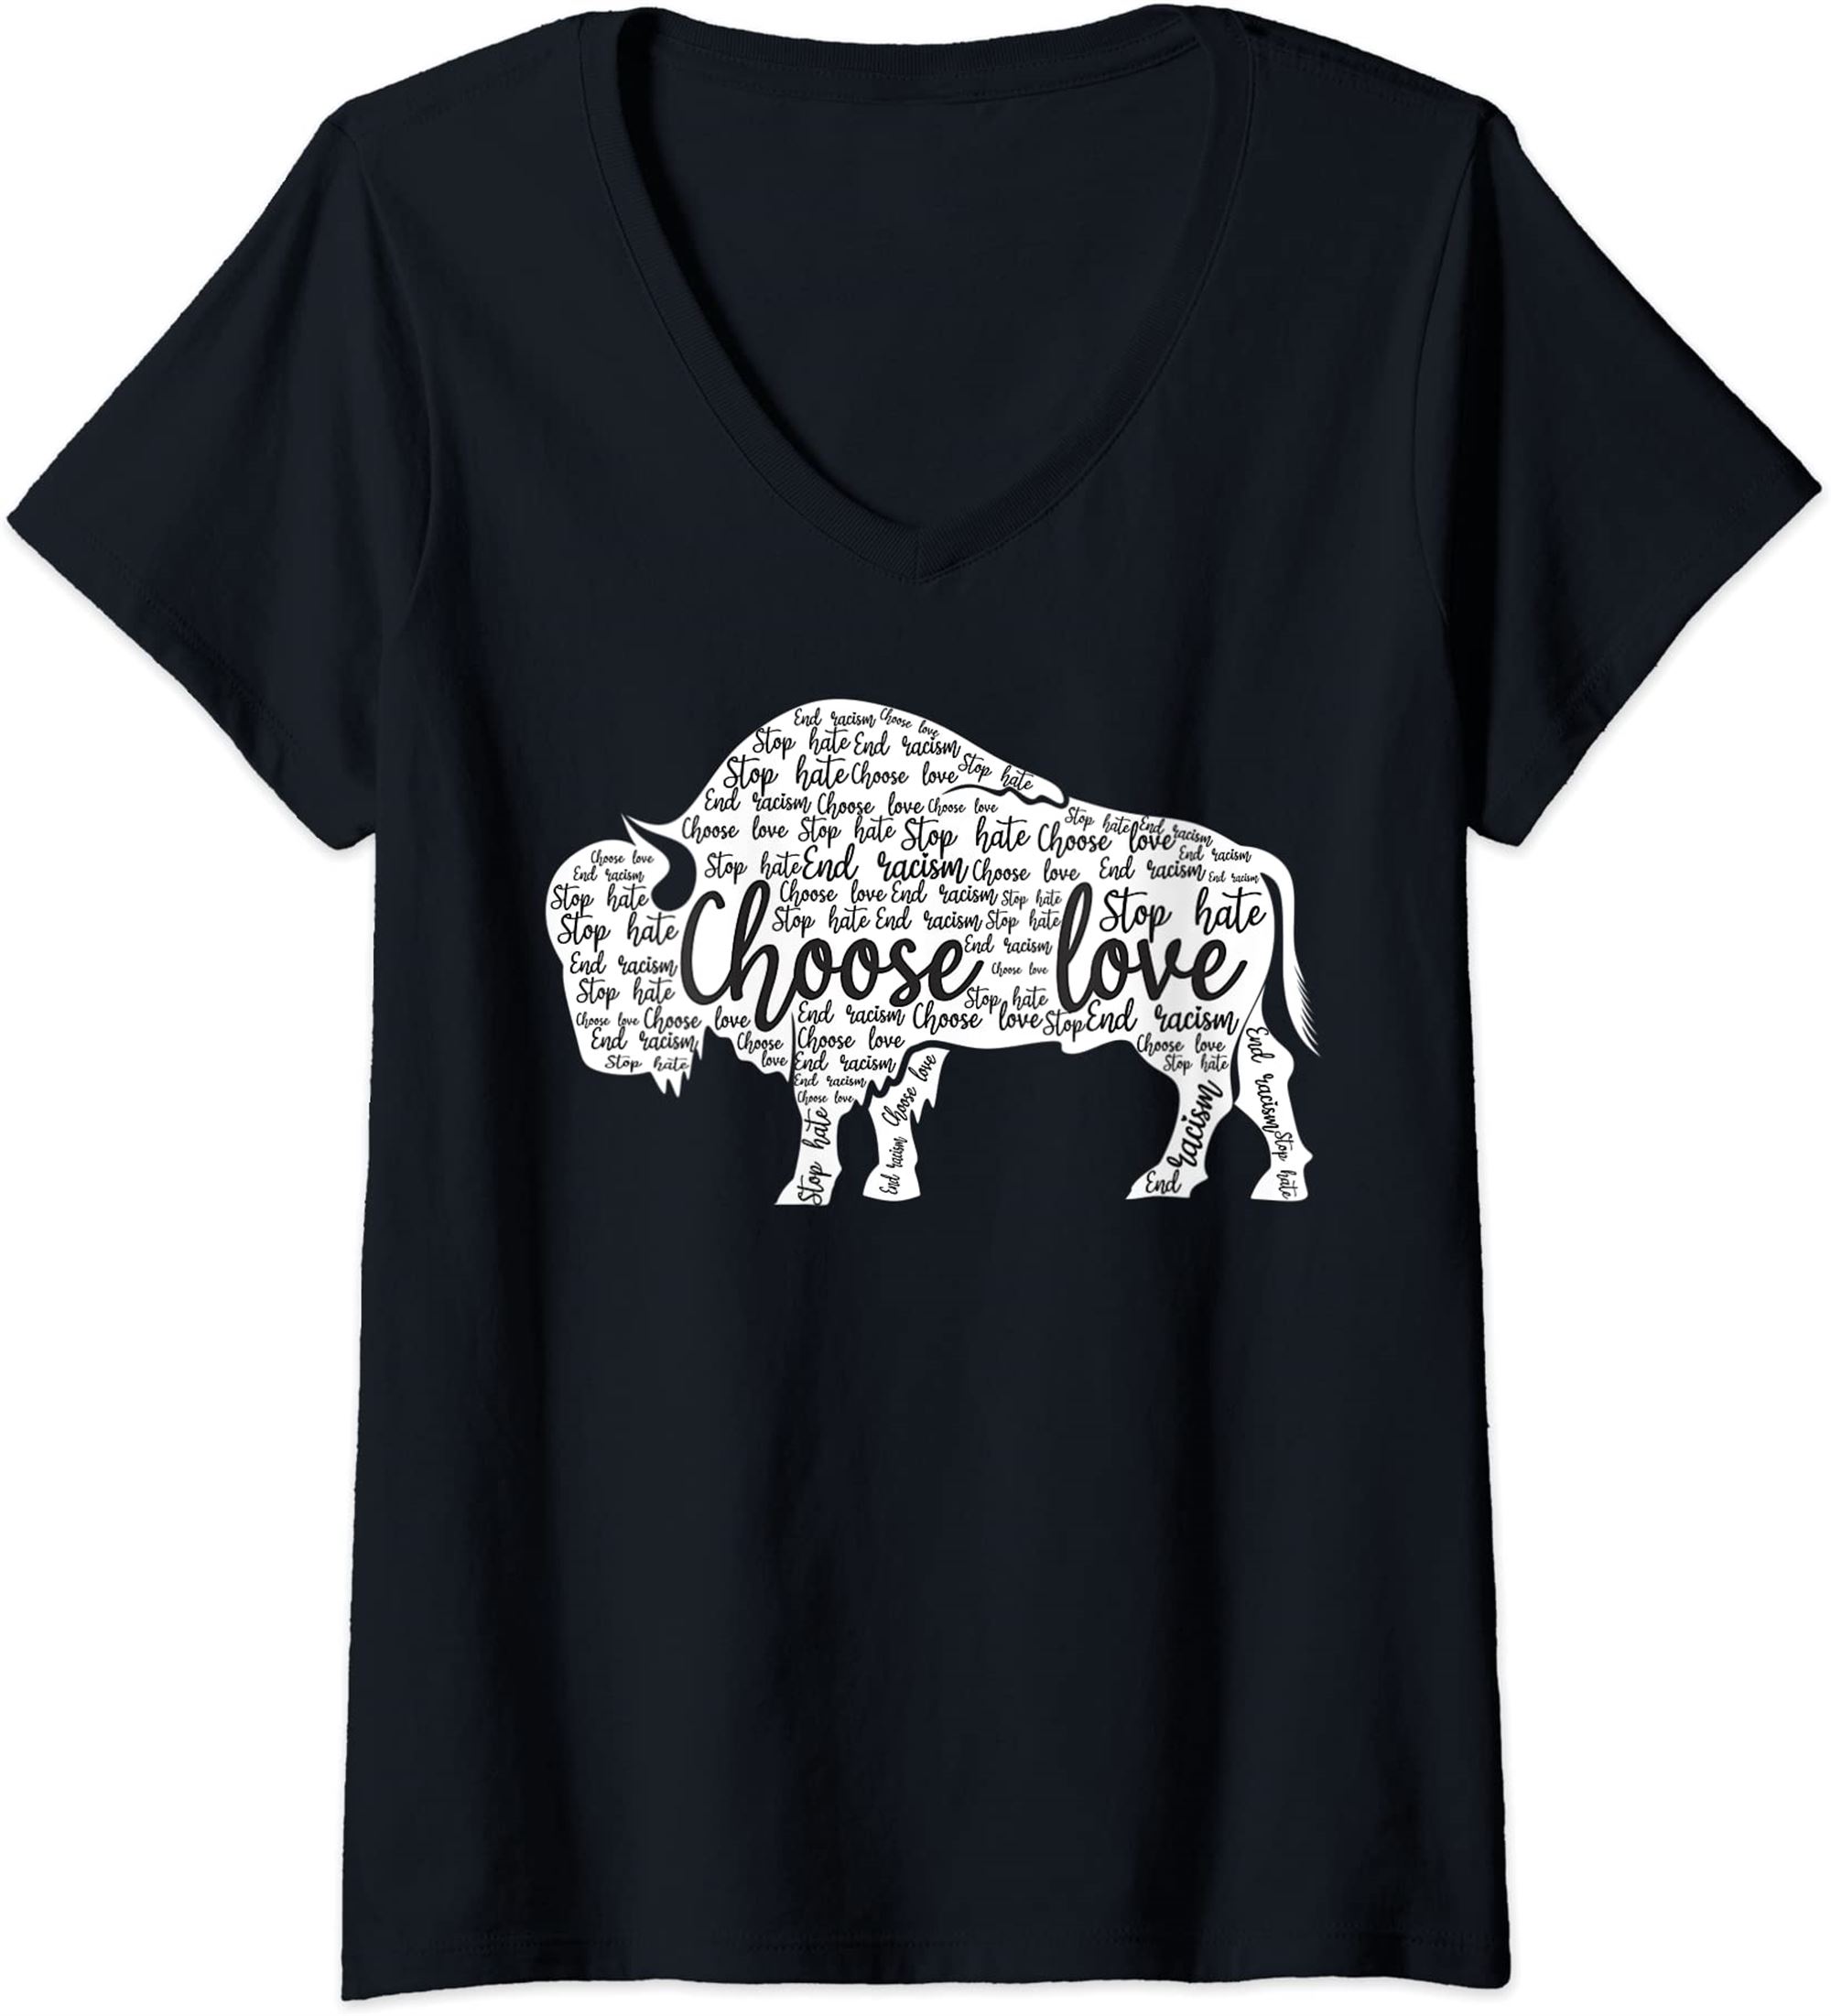 Womens Stop Hate End Racism Choose Love Pray For Buffalo Strong V-neck T-shirt Size Up To 5xl